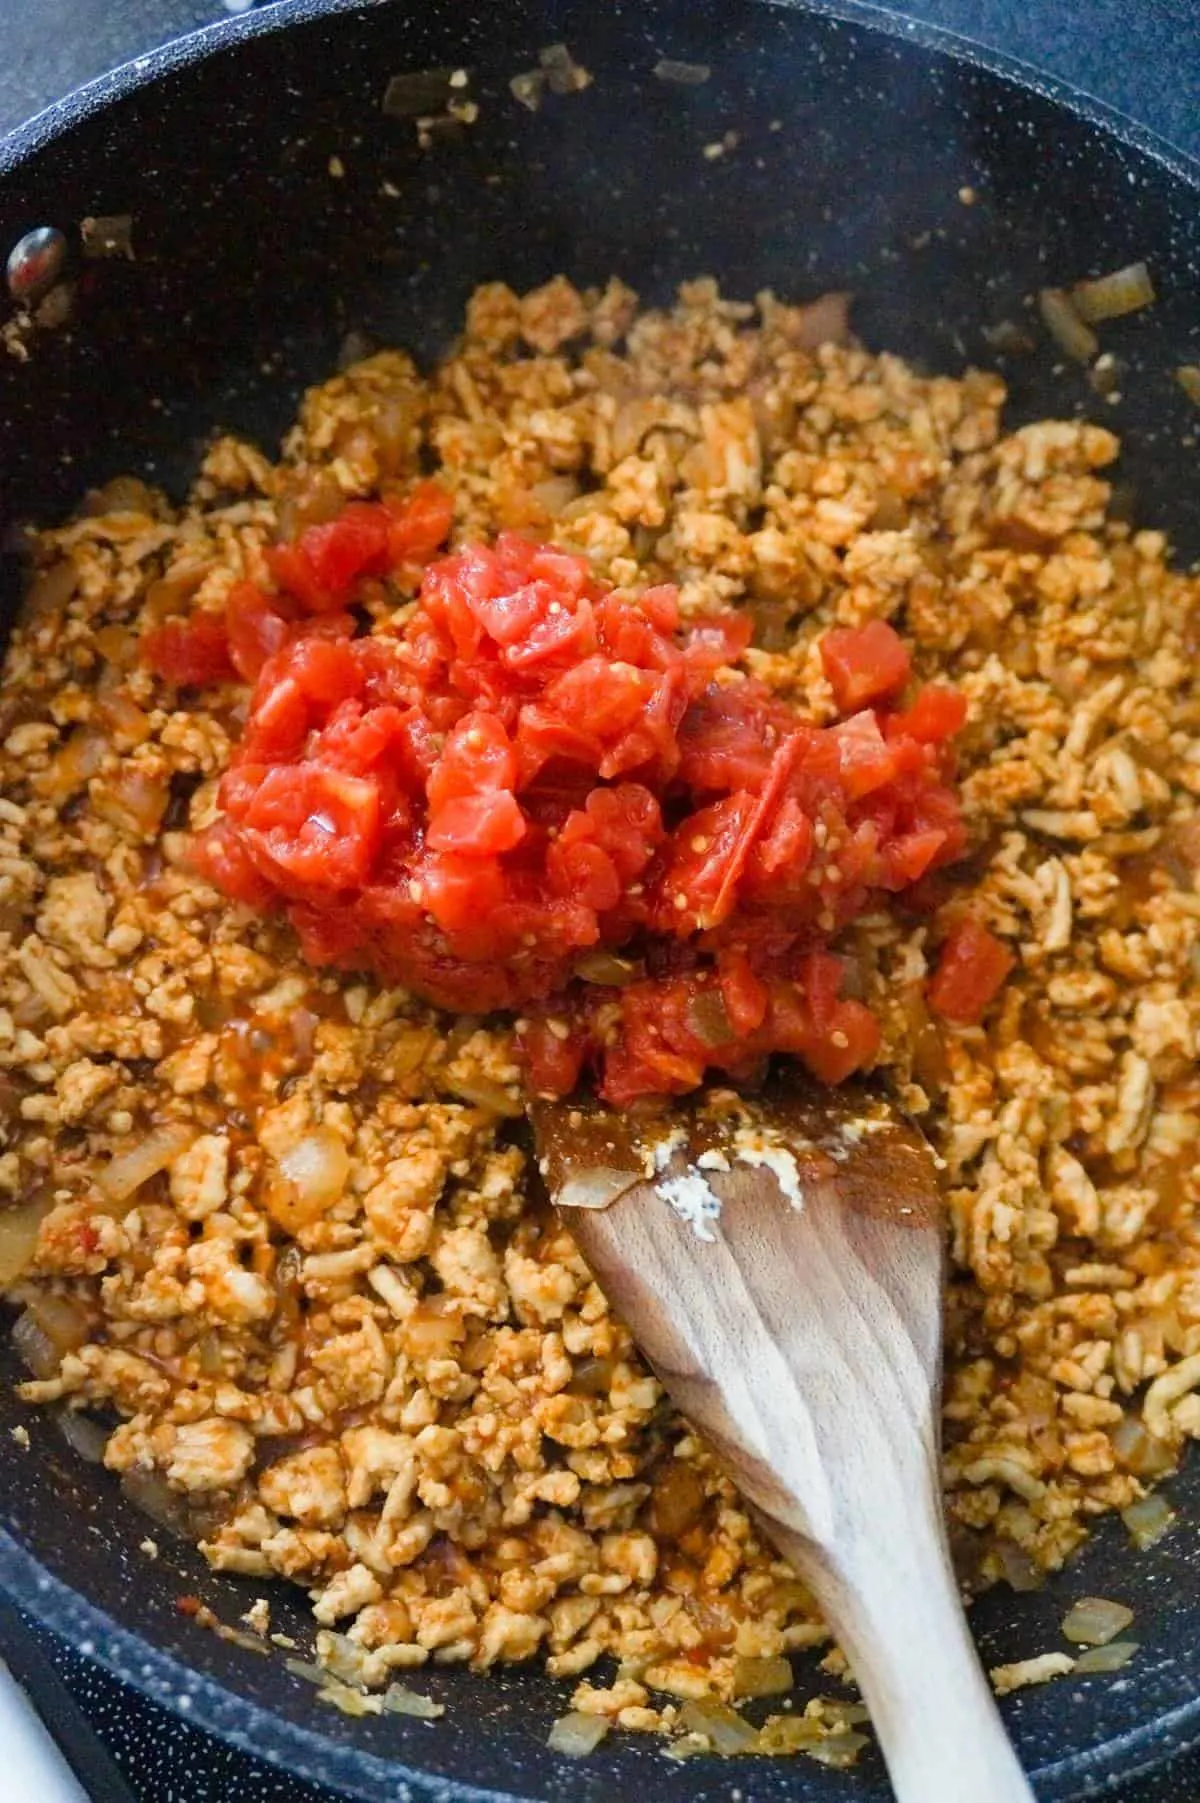 Rotel on top of ground chicken taco meat mixture in a saute pan